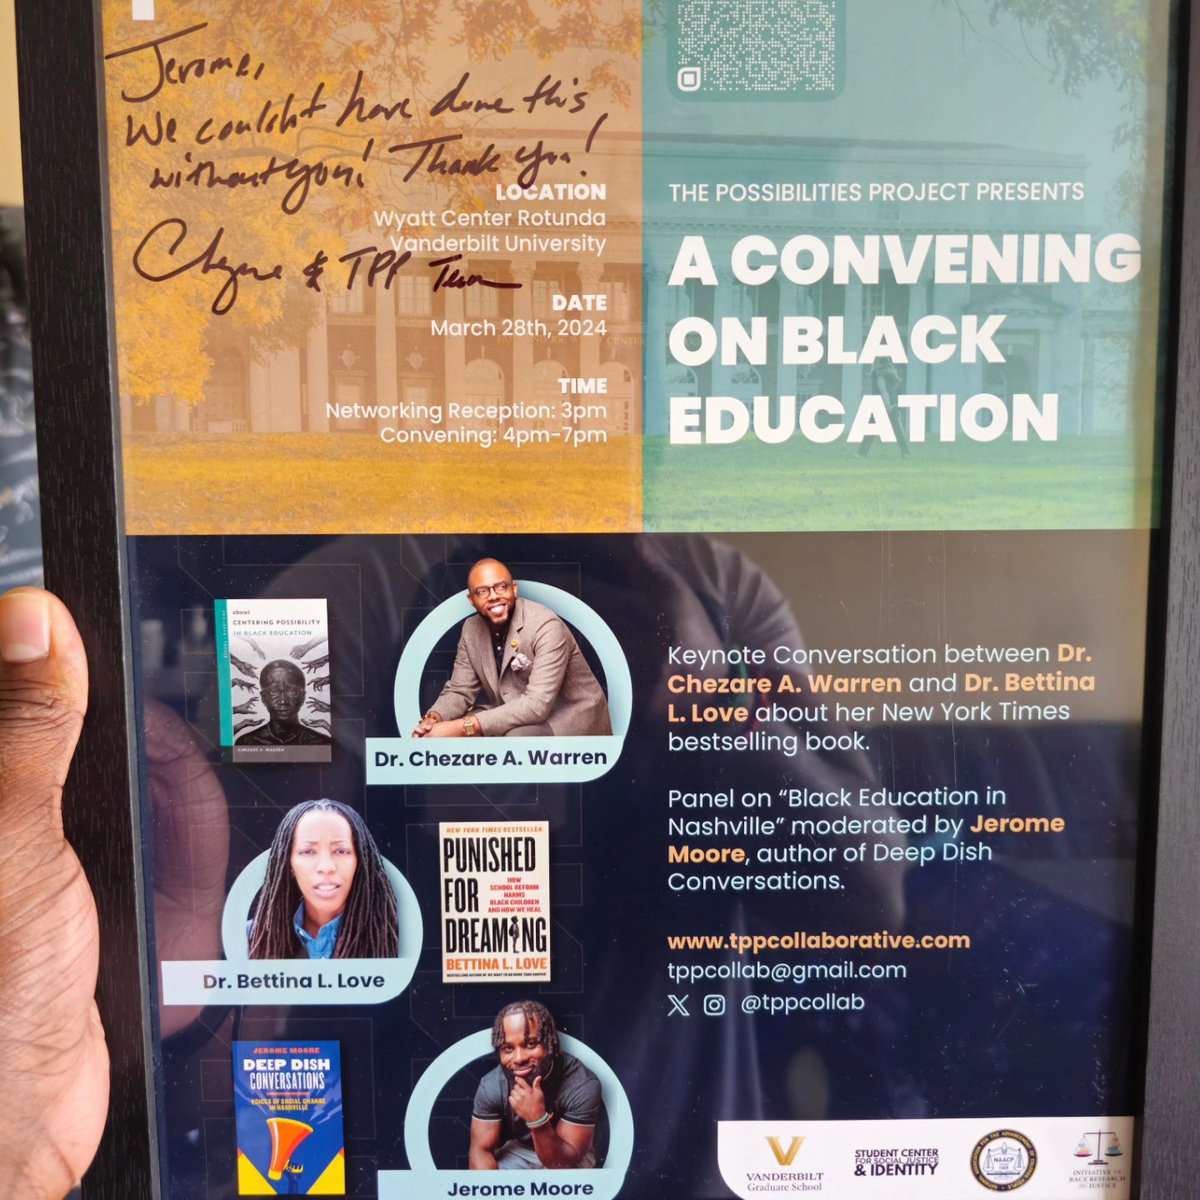 The first 'A Convening on Black Education' was an AMAZING event!  

It was truly an enriching experience, team effort, and I feel privileged to have been a part of it.

#BlackEducation #PowerfulEvent #EnrichingExperience